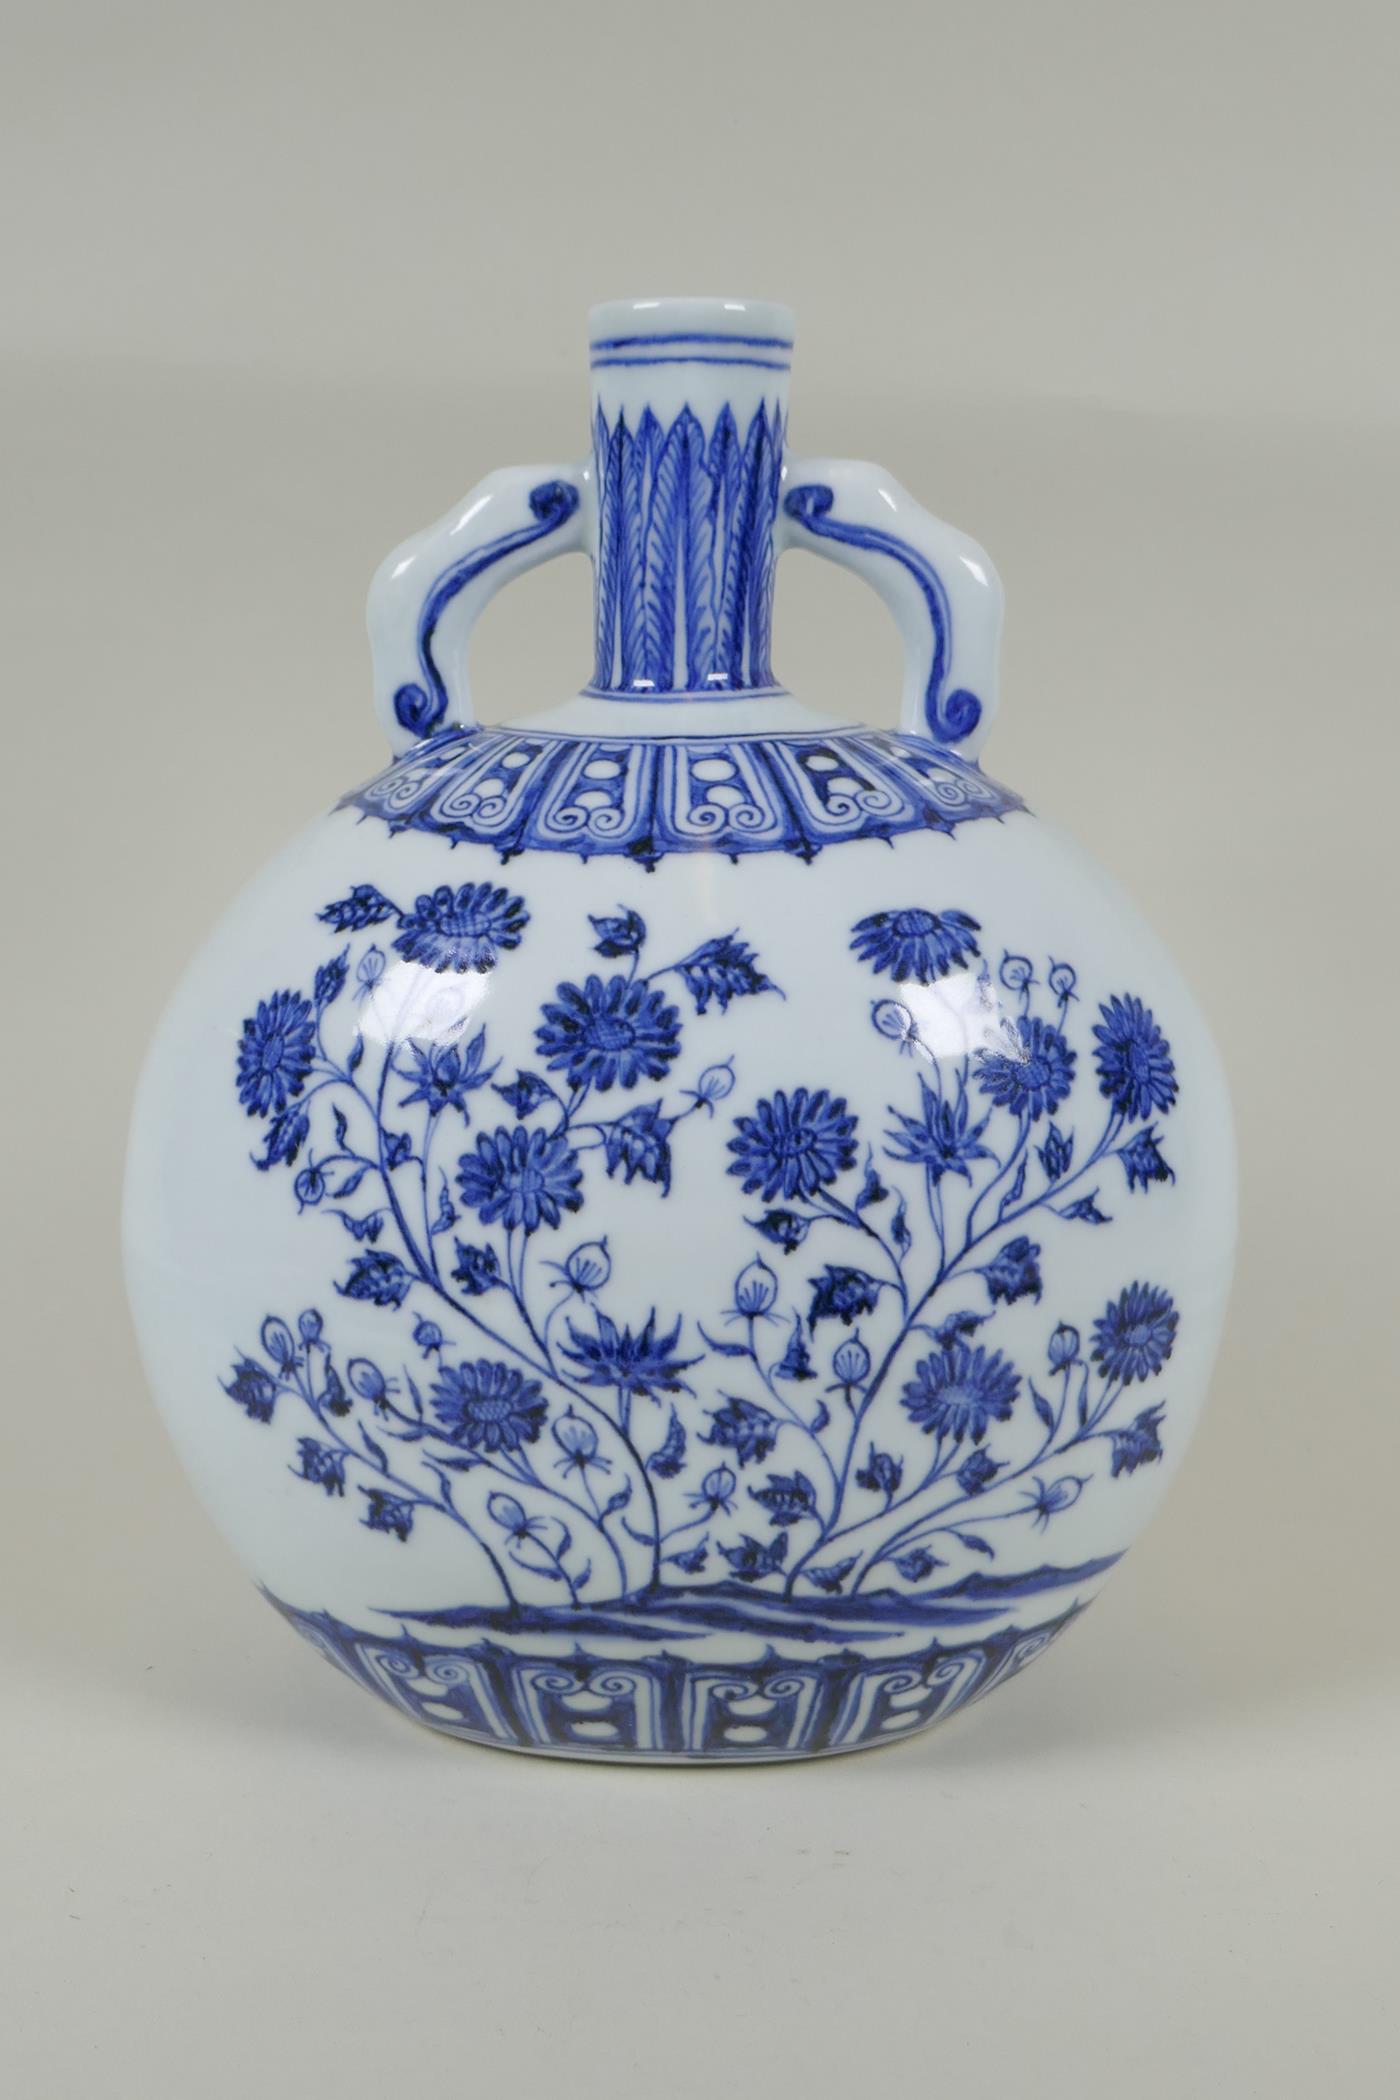 A Chinese blue and white porcelain moon flask with two handles and floral decoration, 4 character - Image 3 of 4